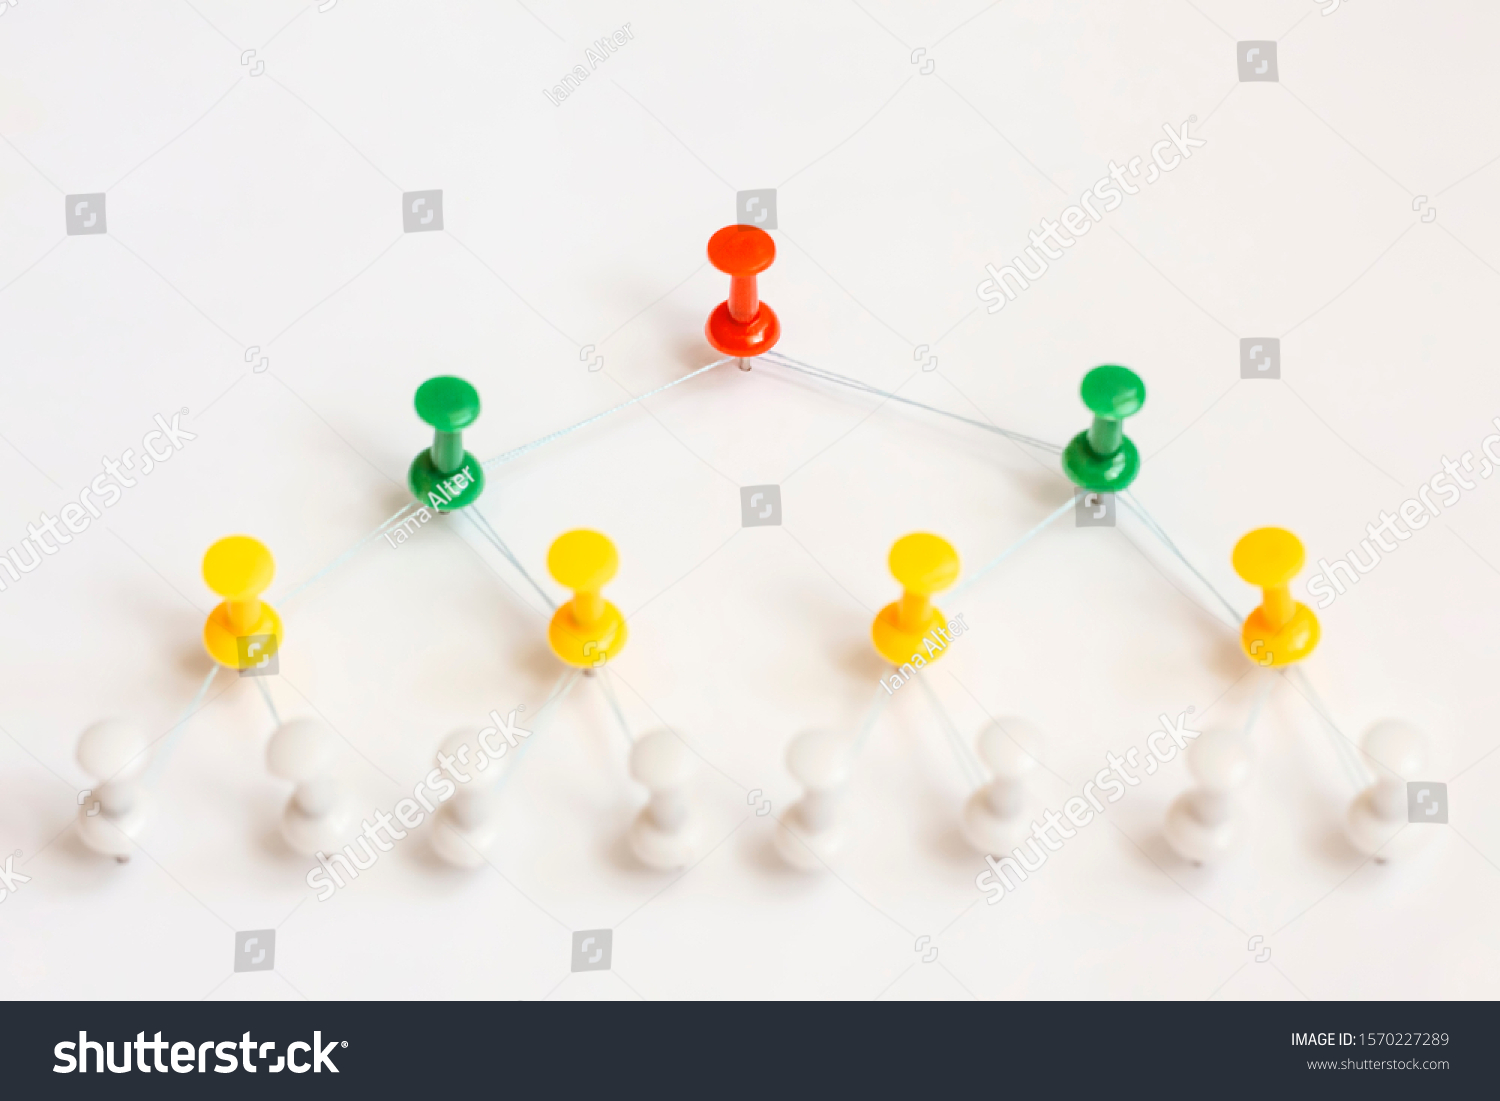 Organization structure. Group colorful pins of command communication chain. Hierarchy chart, diagram. Network marketing, leadership, team building, management and connected people concepts. #1570227289